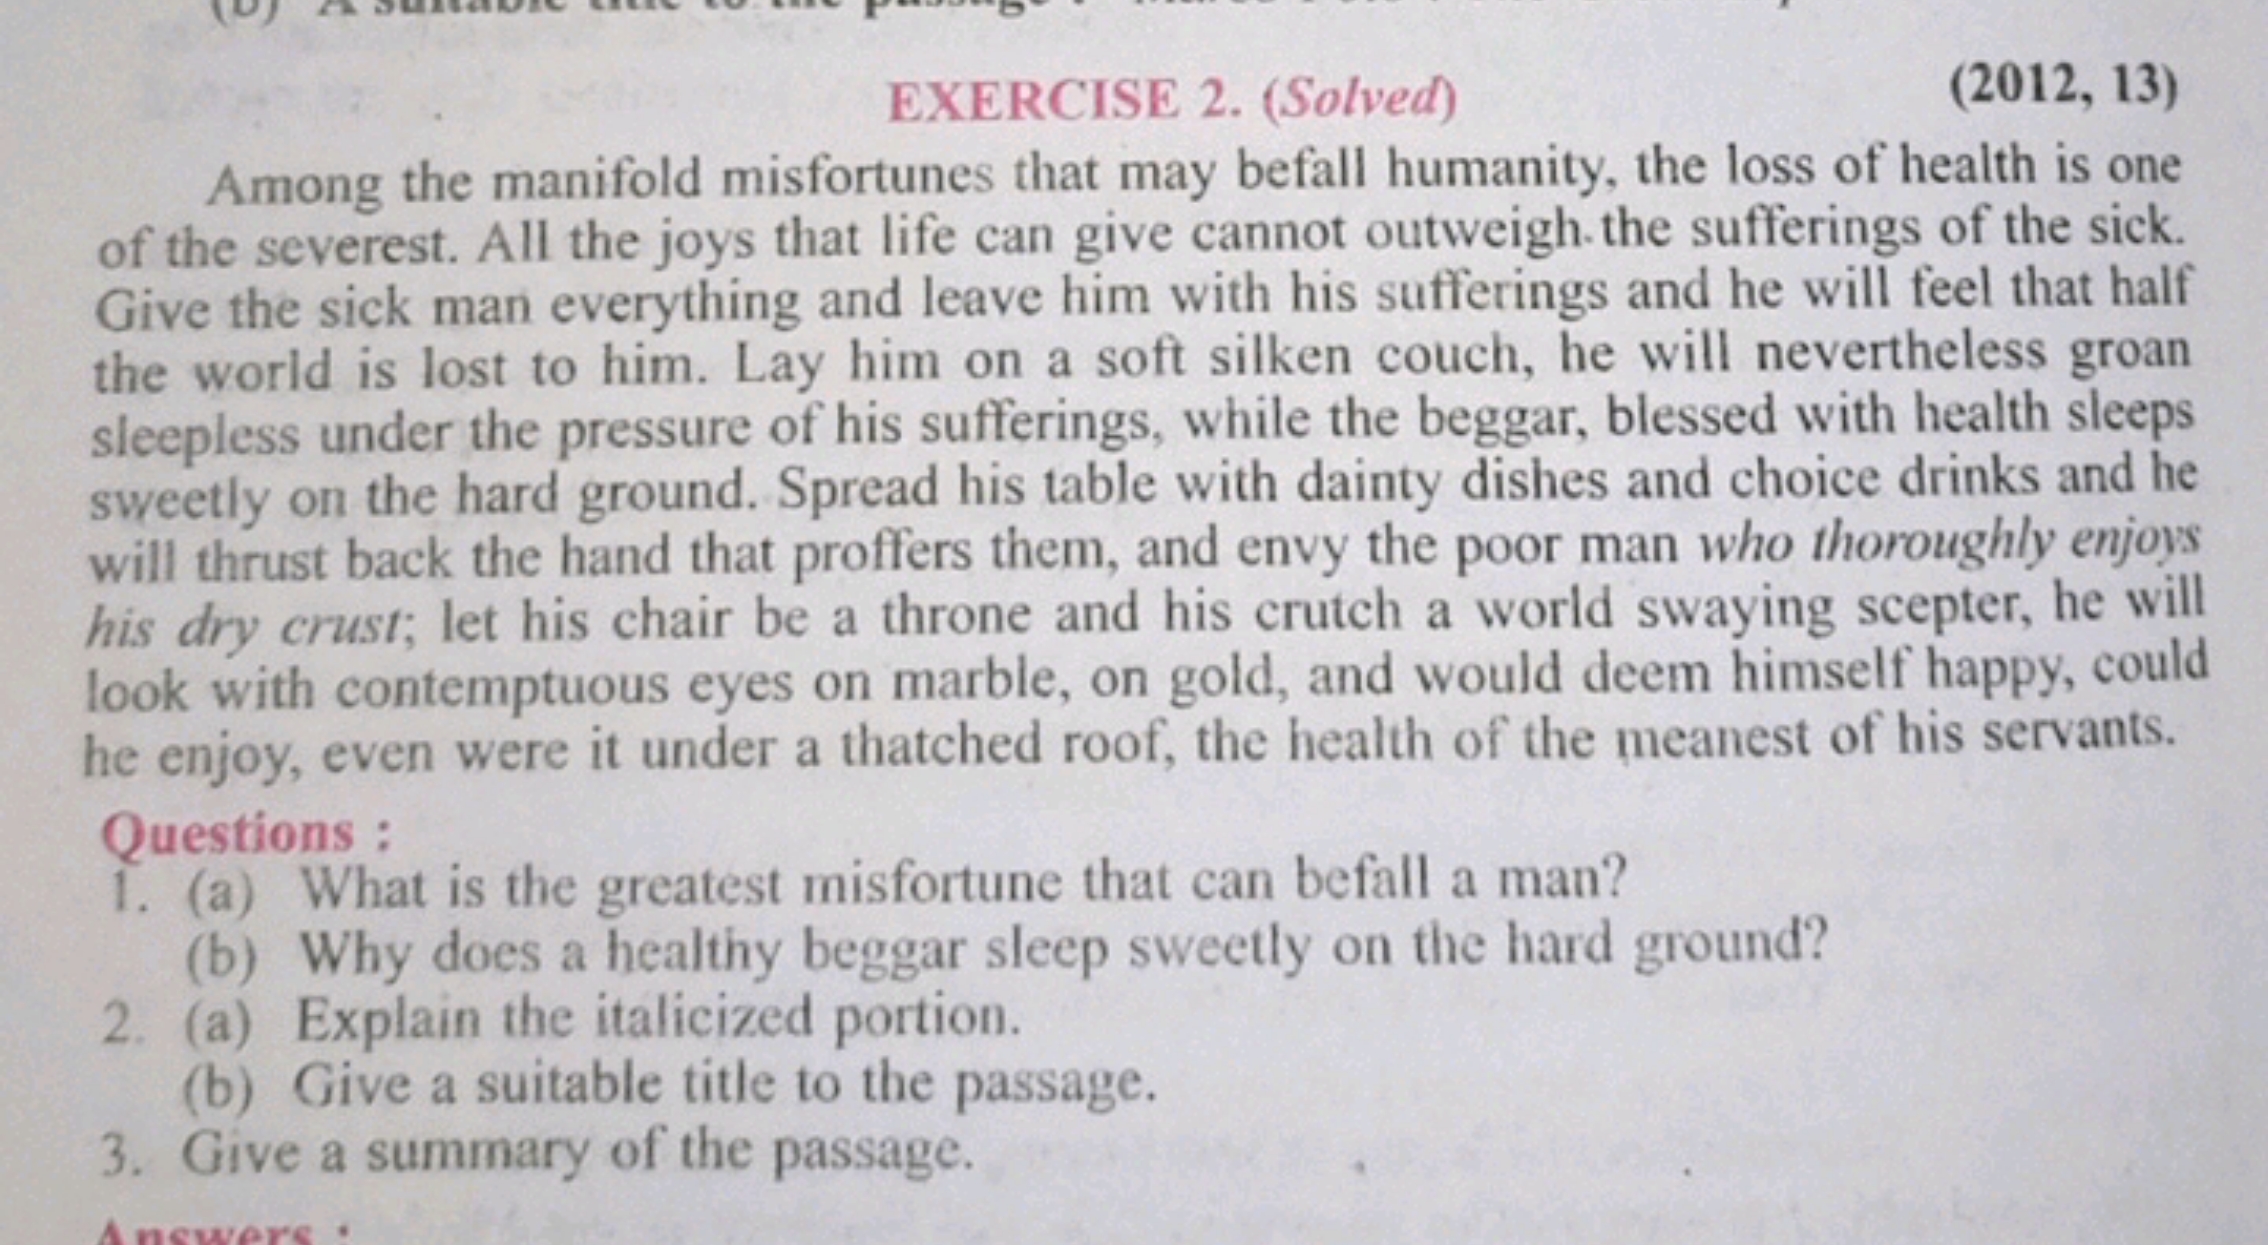 EXERCISE 2. (Solved)
(2012,13)
Among the manifold misfortunes that may